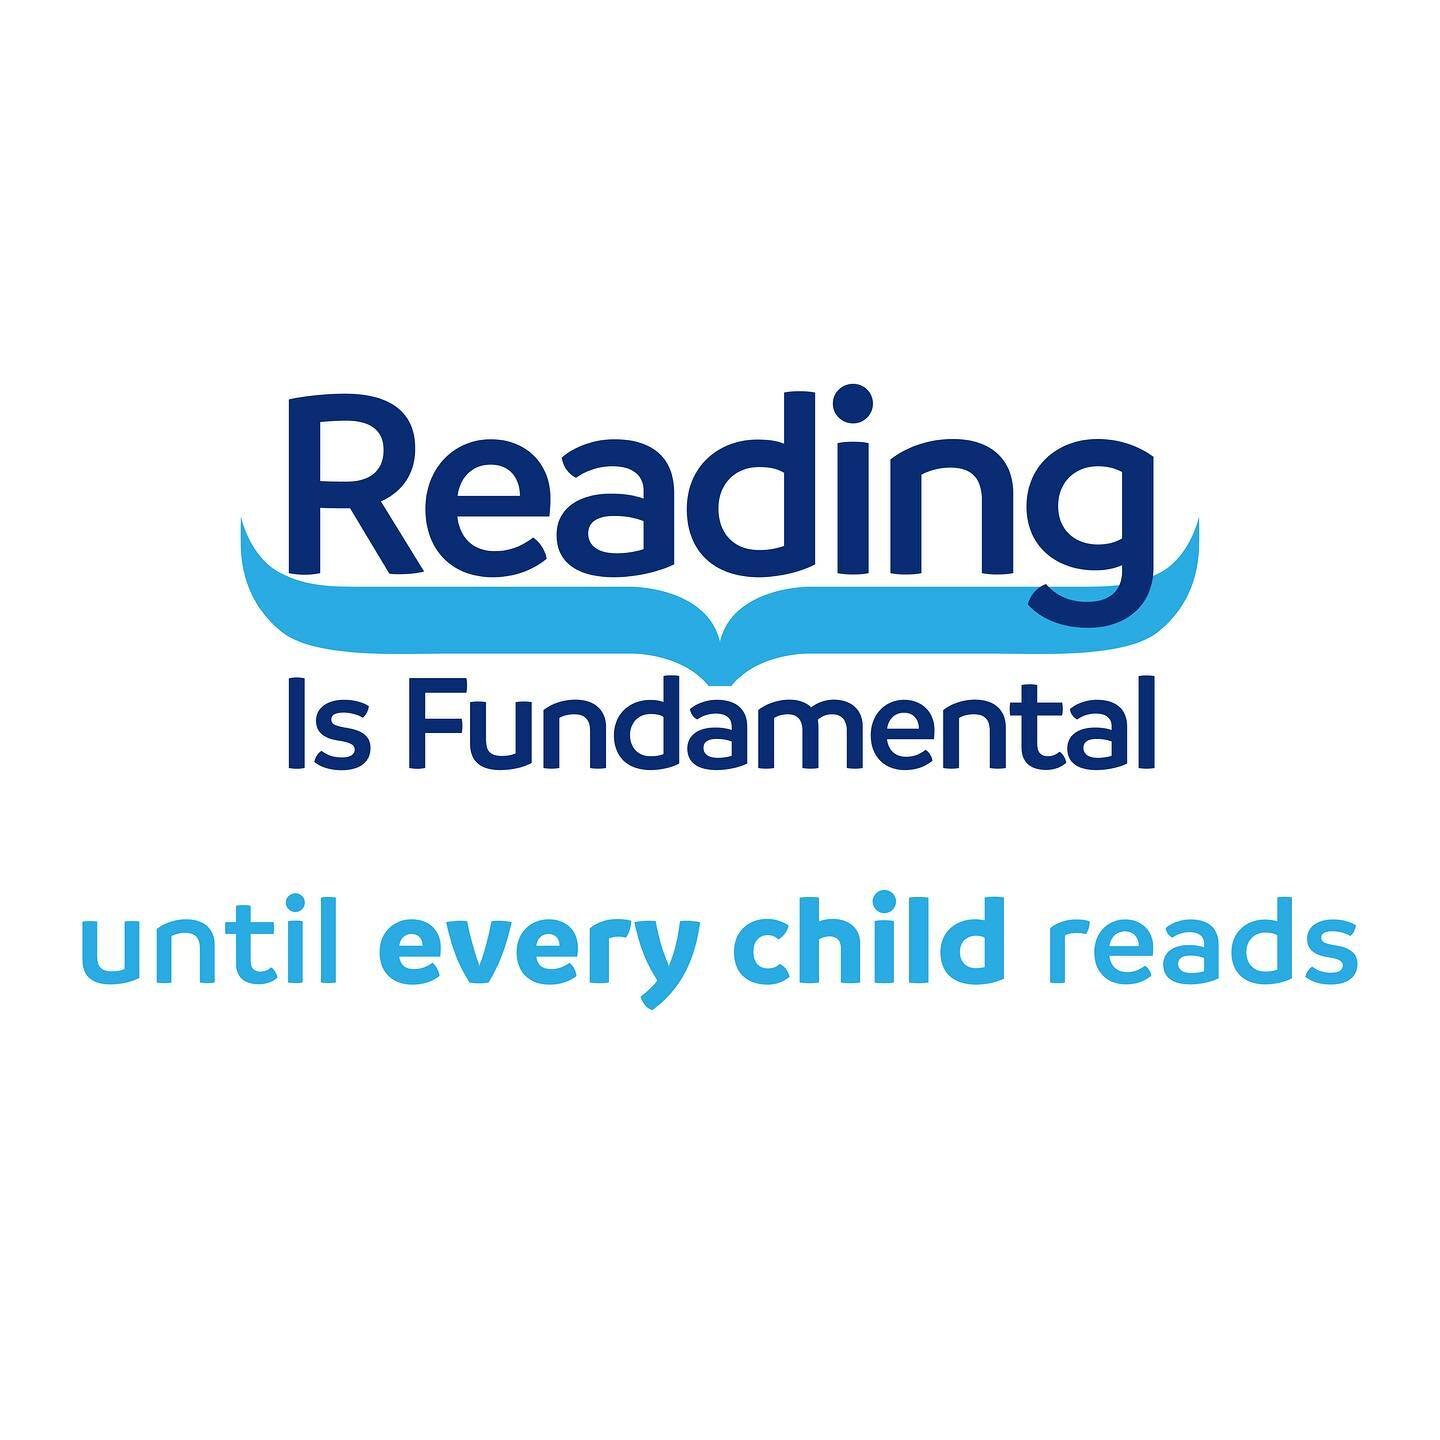 We're excited to announce that we're partnering with @readingisfundamental ! RIF is the nation's largest children's literacy non-profit, and provides quality content to give every child the fundamentals for success. We're thrilled to work with an org